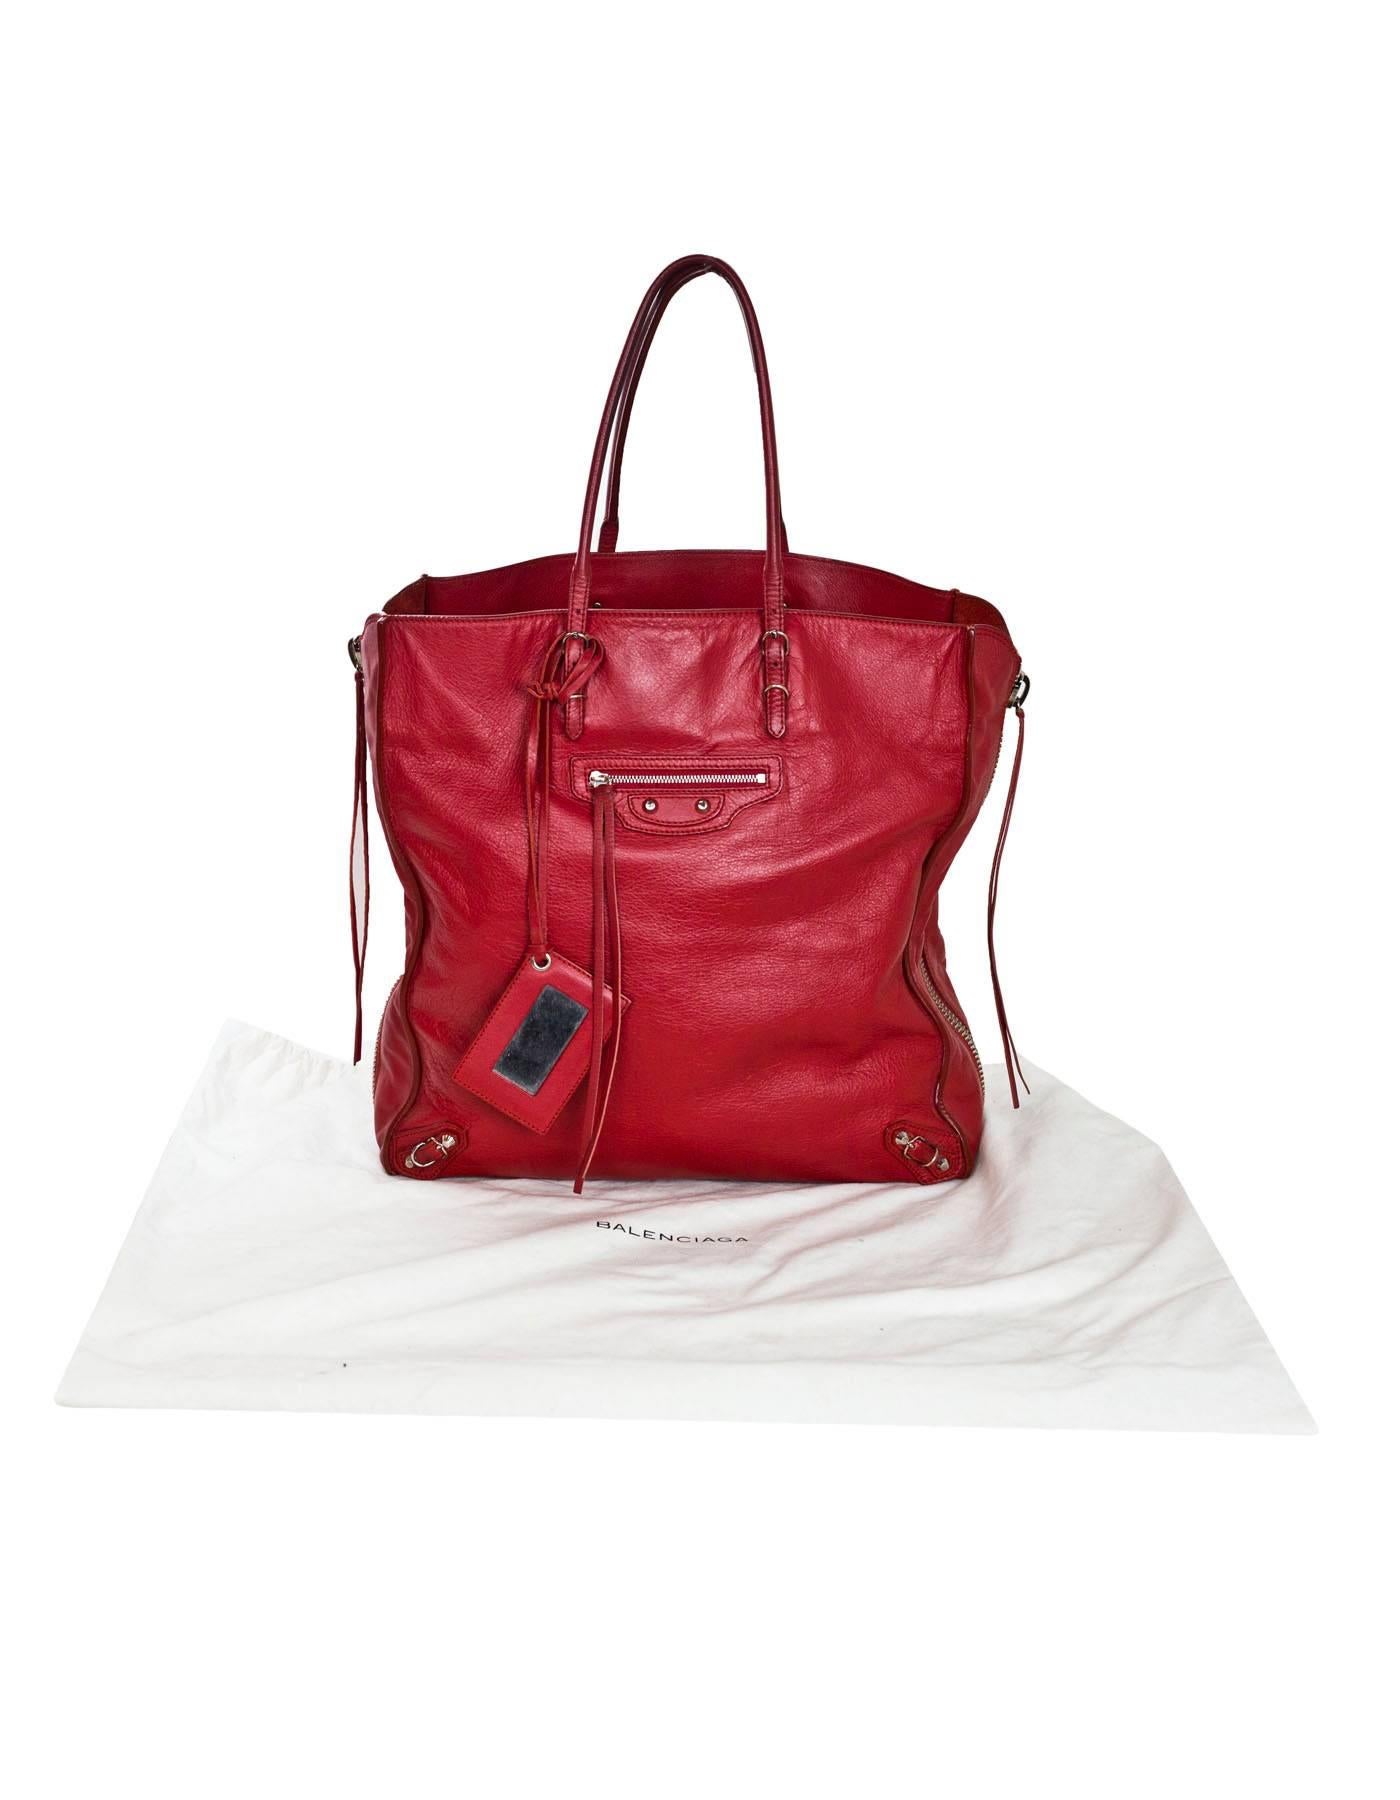 Balenciaga Red Leather A4 Papier Zip Tote Bag with Dust Bag 5